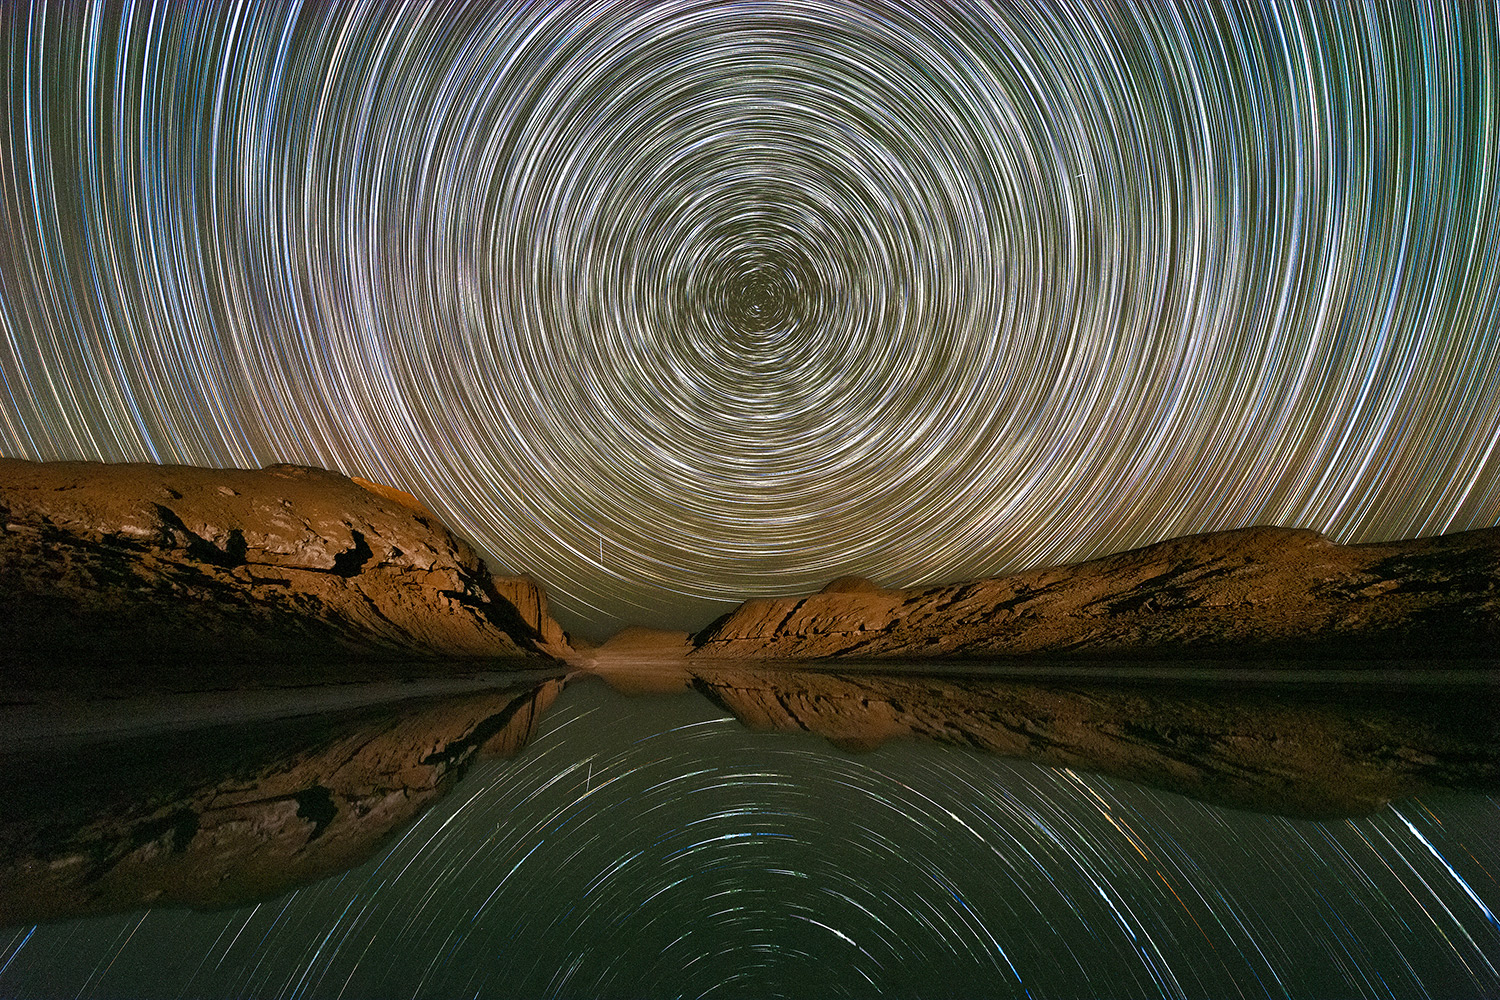 Reflection of the rotation of the stars